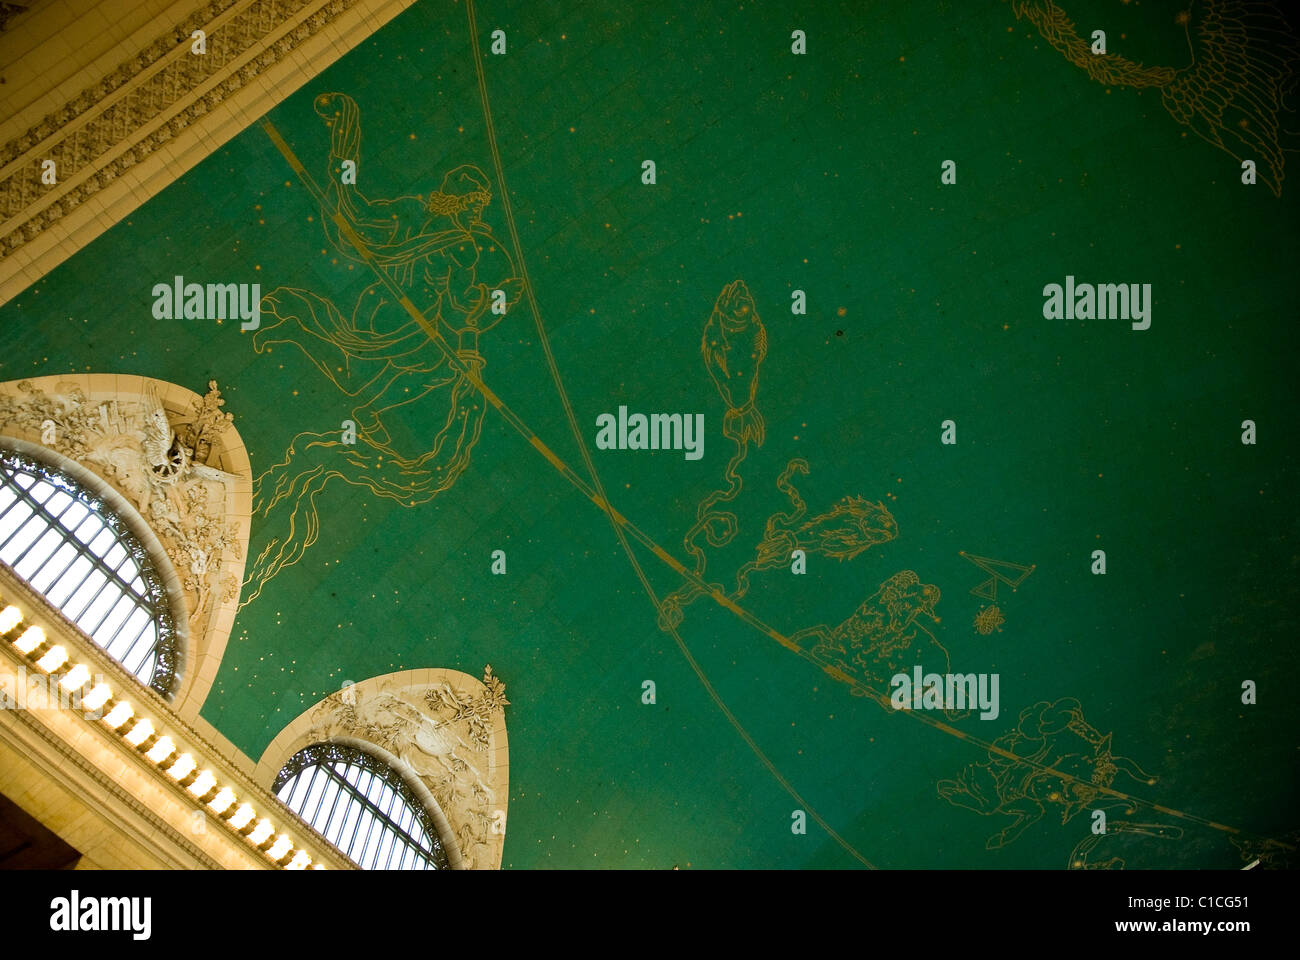 The astrological ceiling of Grand Central Station, New York City, USA Stock Photo